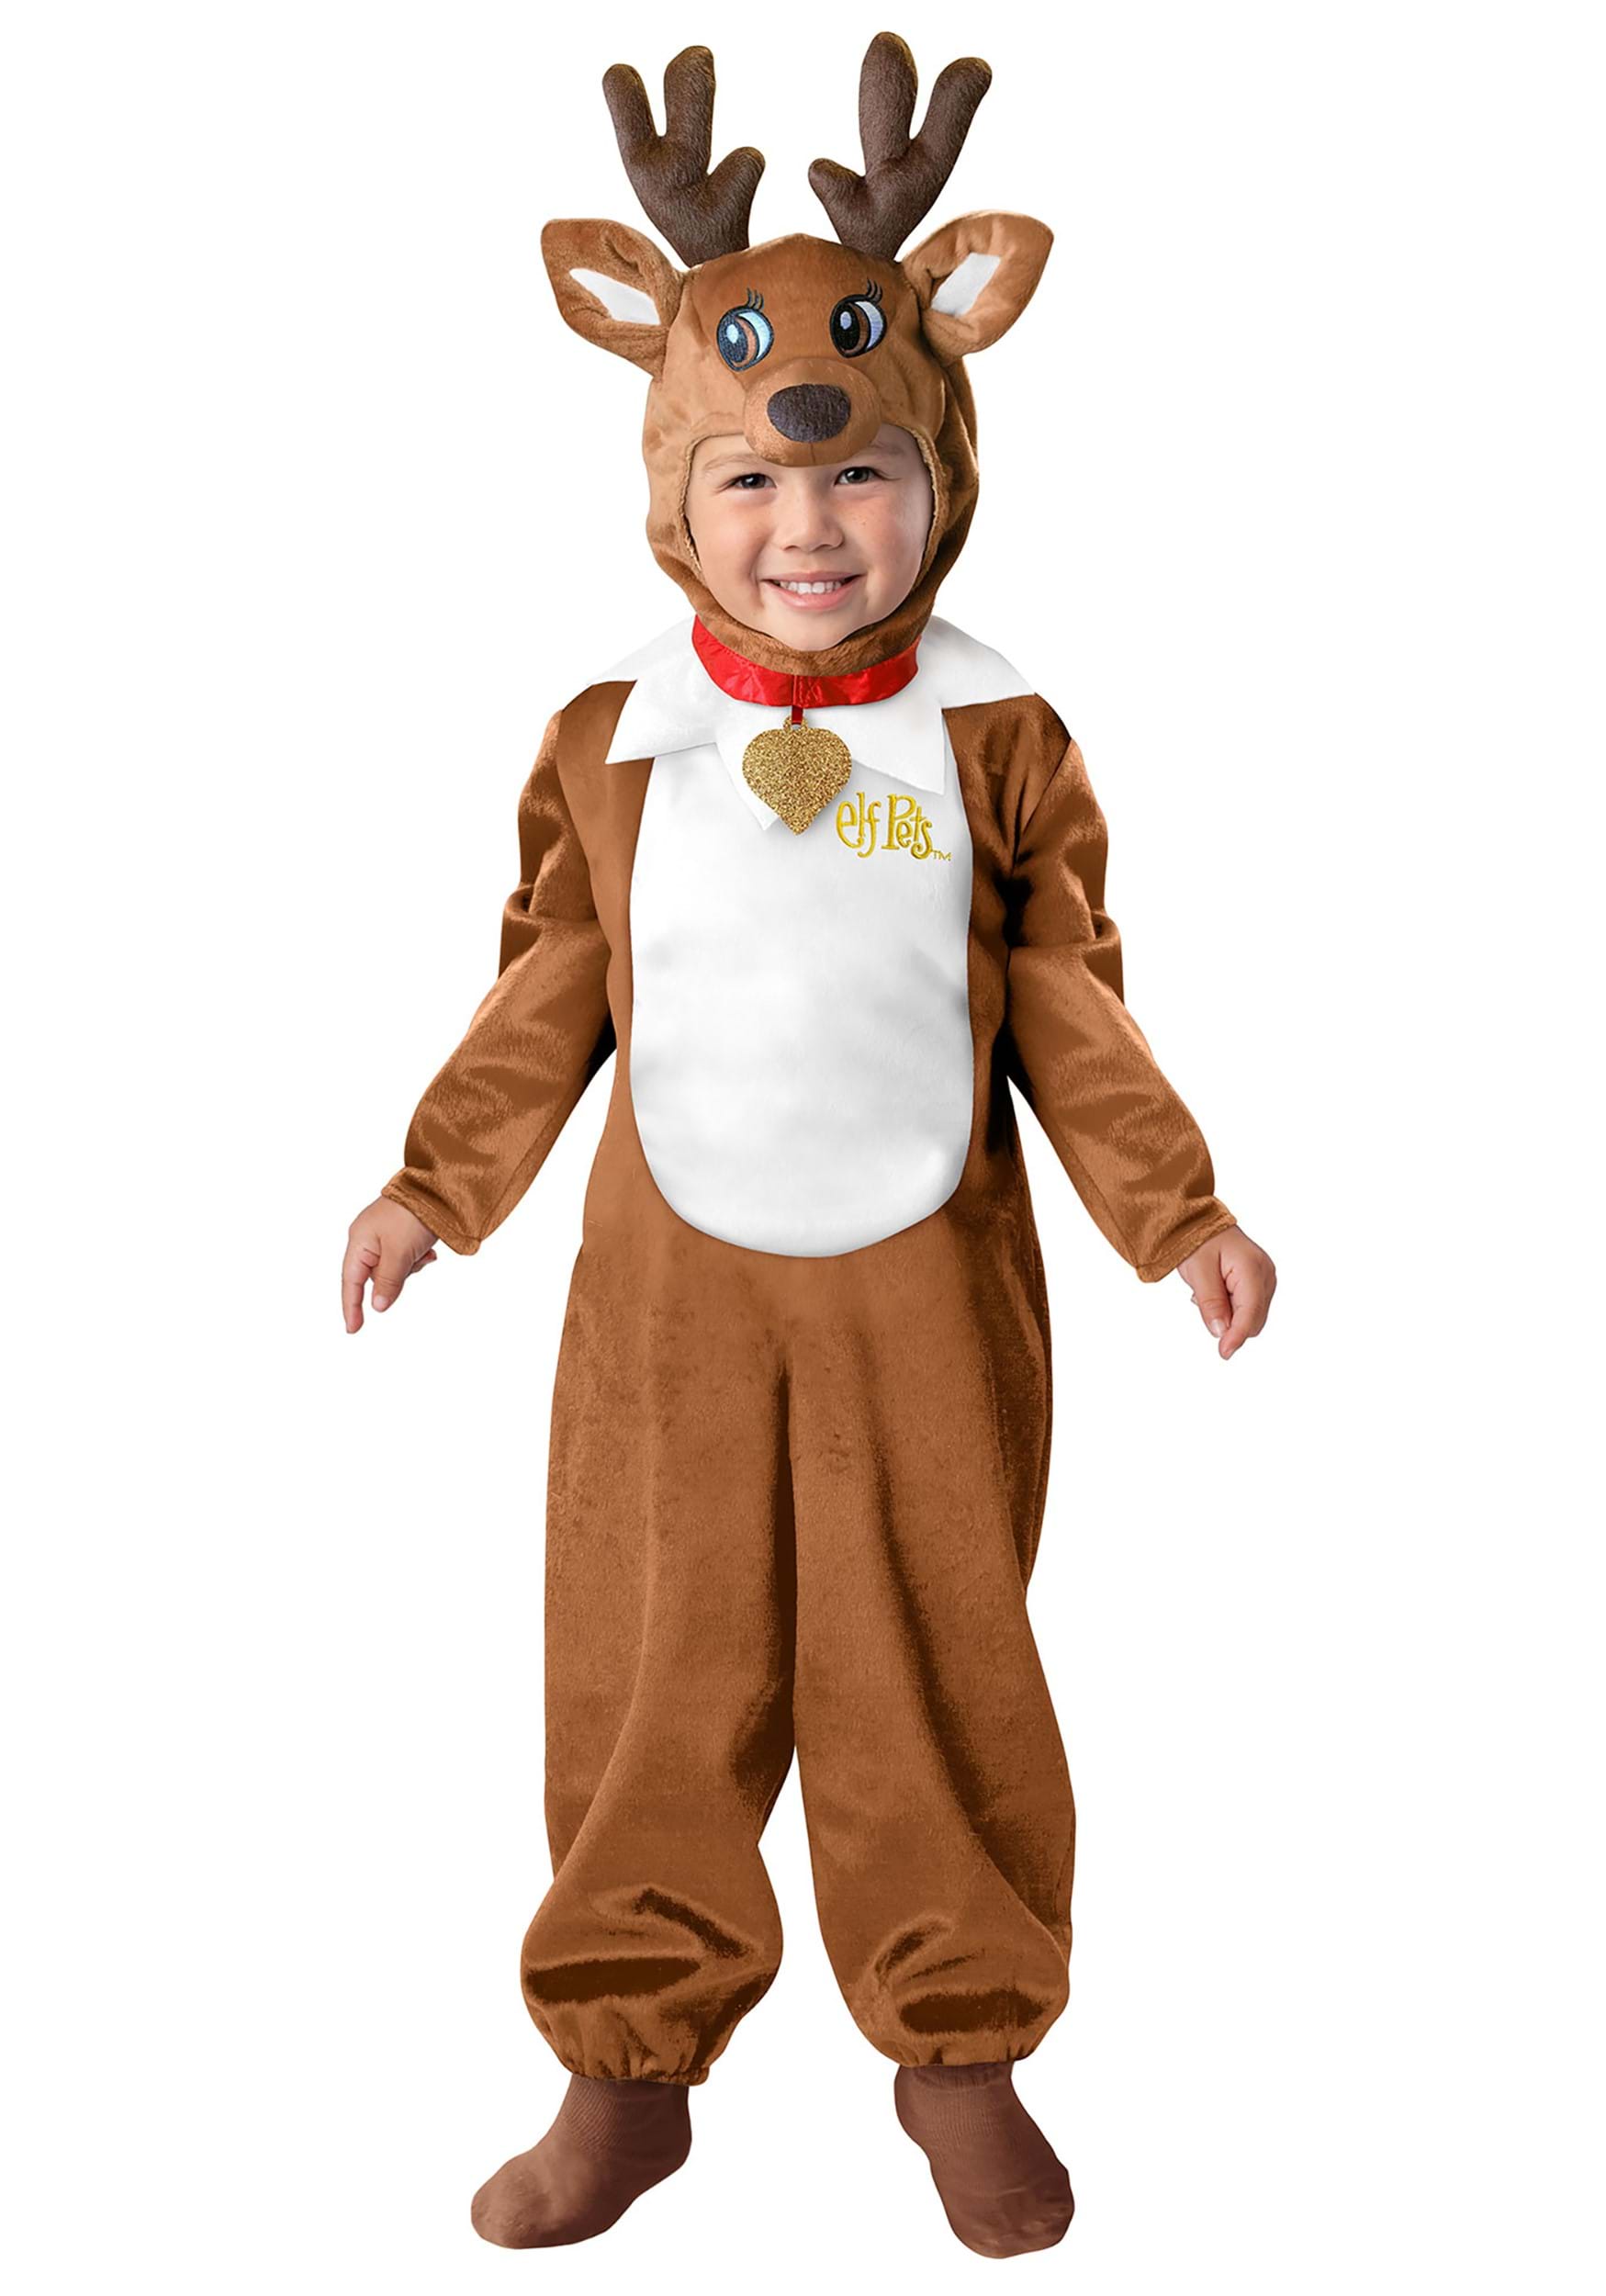 REINDEER RUDOLPH CHRISTMAS ANTLERS INFANT TODDLER COSTUME 18-2T 